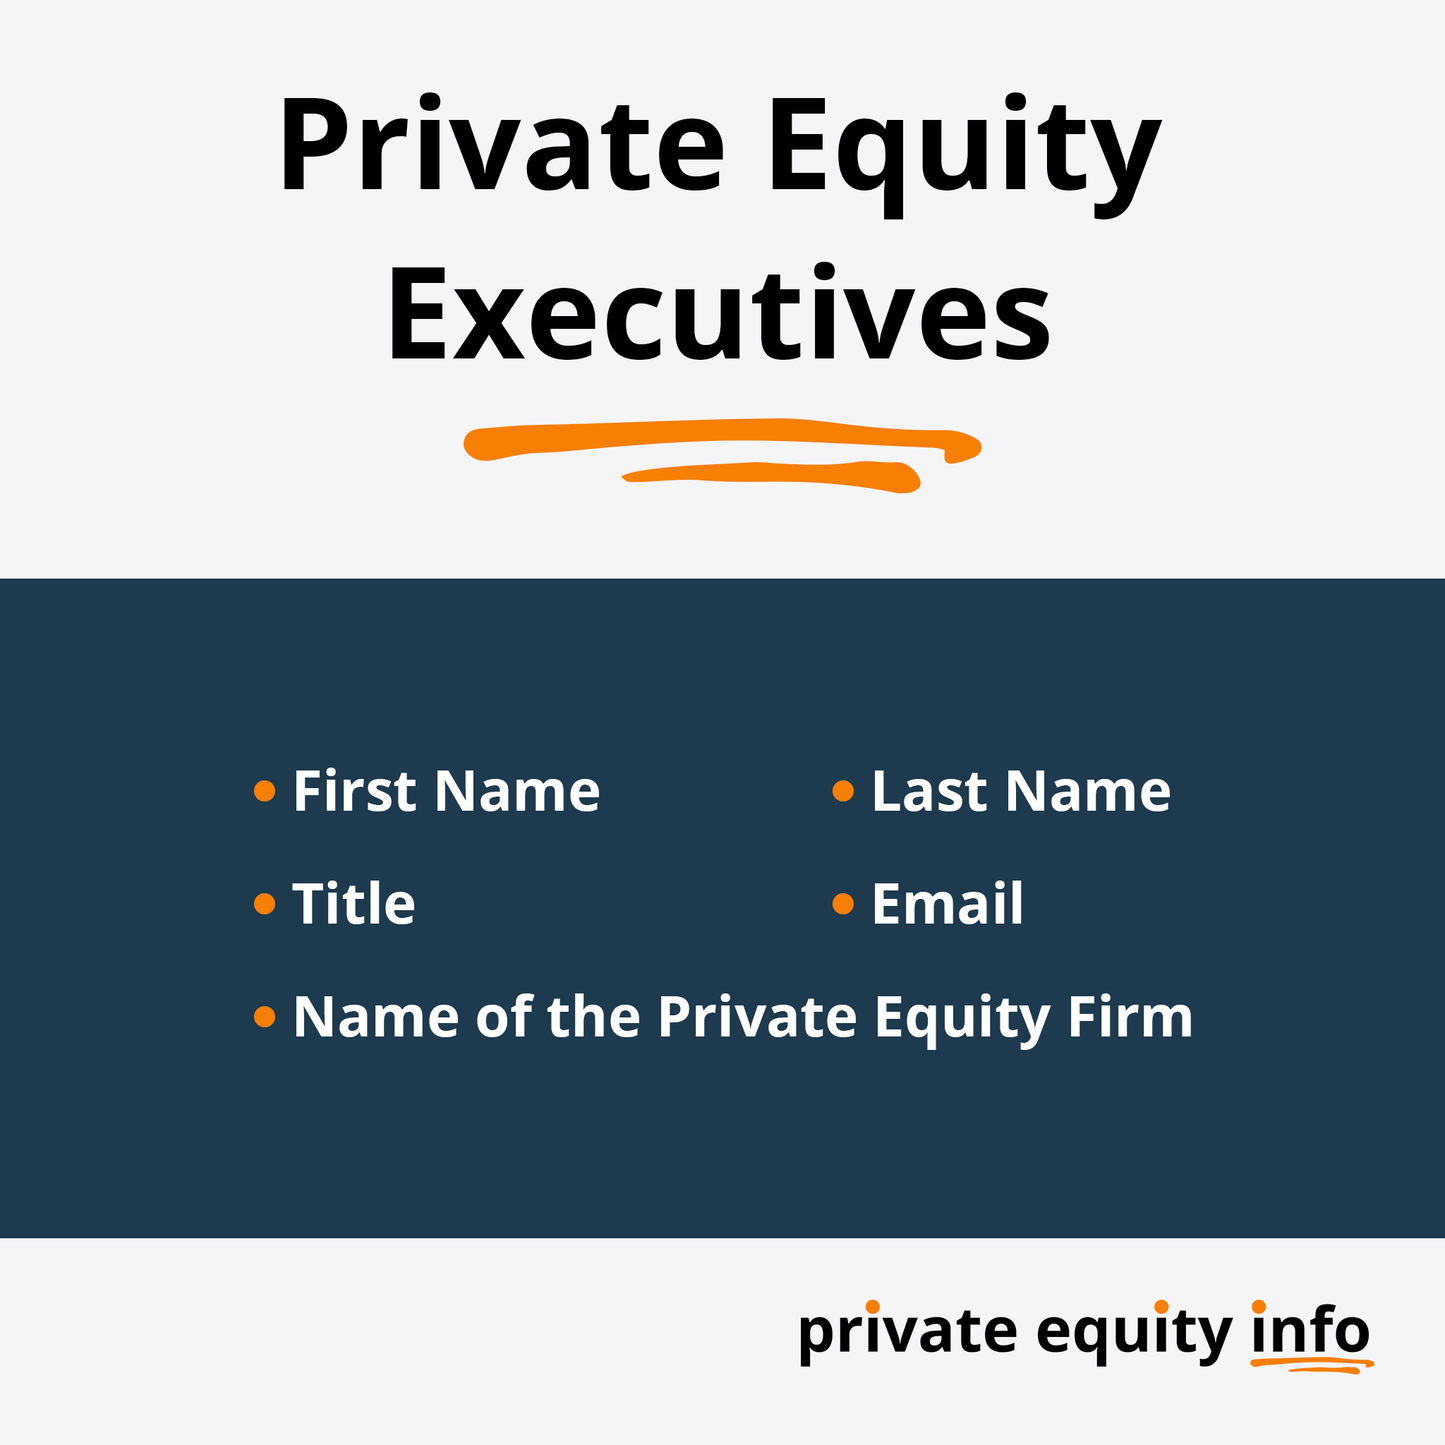 Private Equity Firms in Colorado, Utah and Wyoming